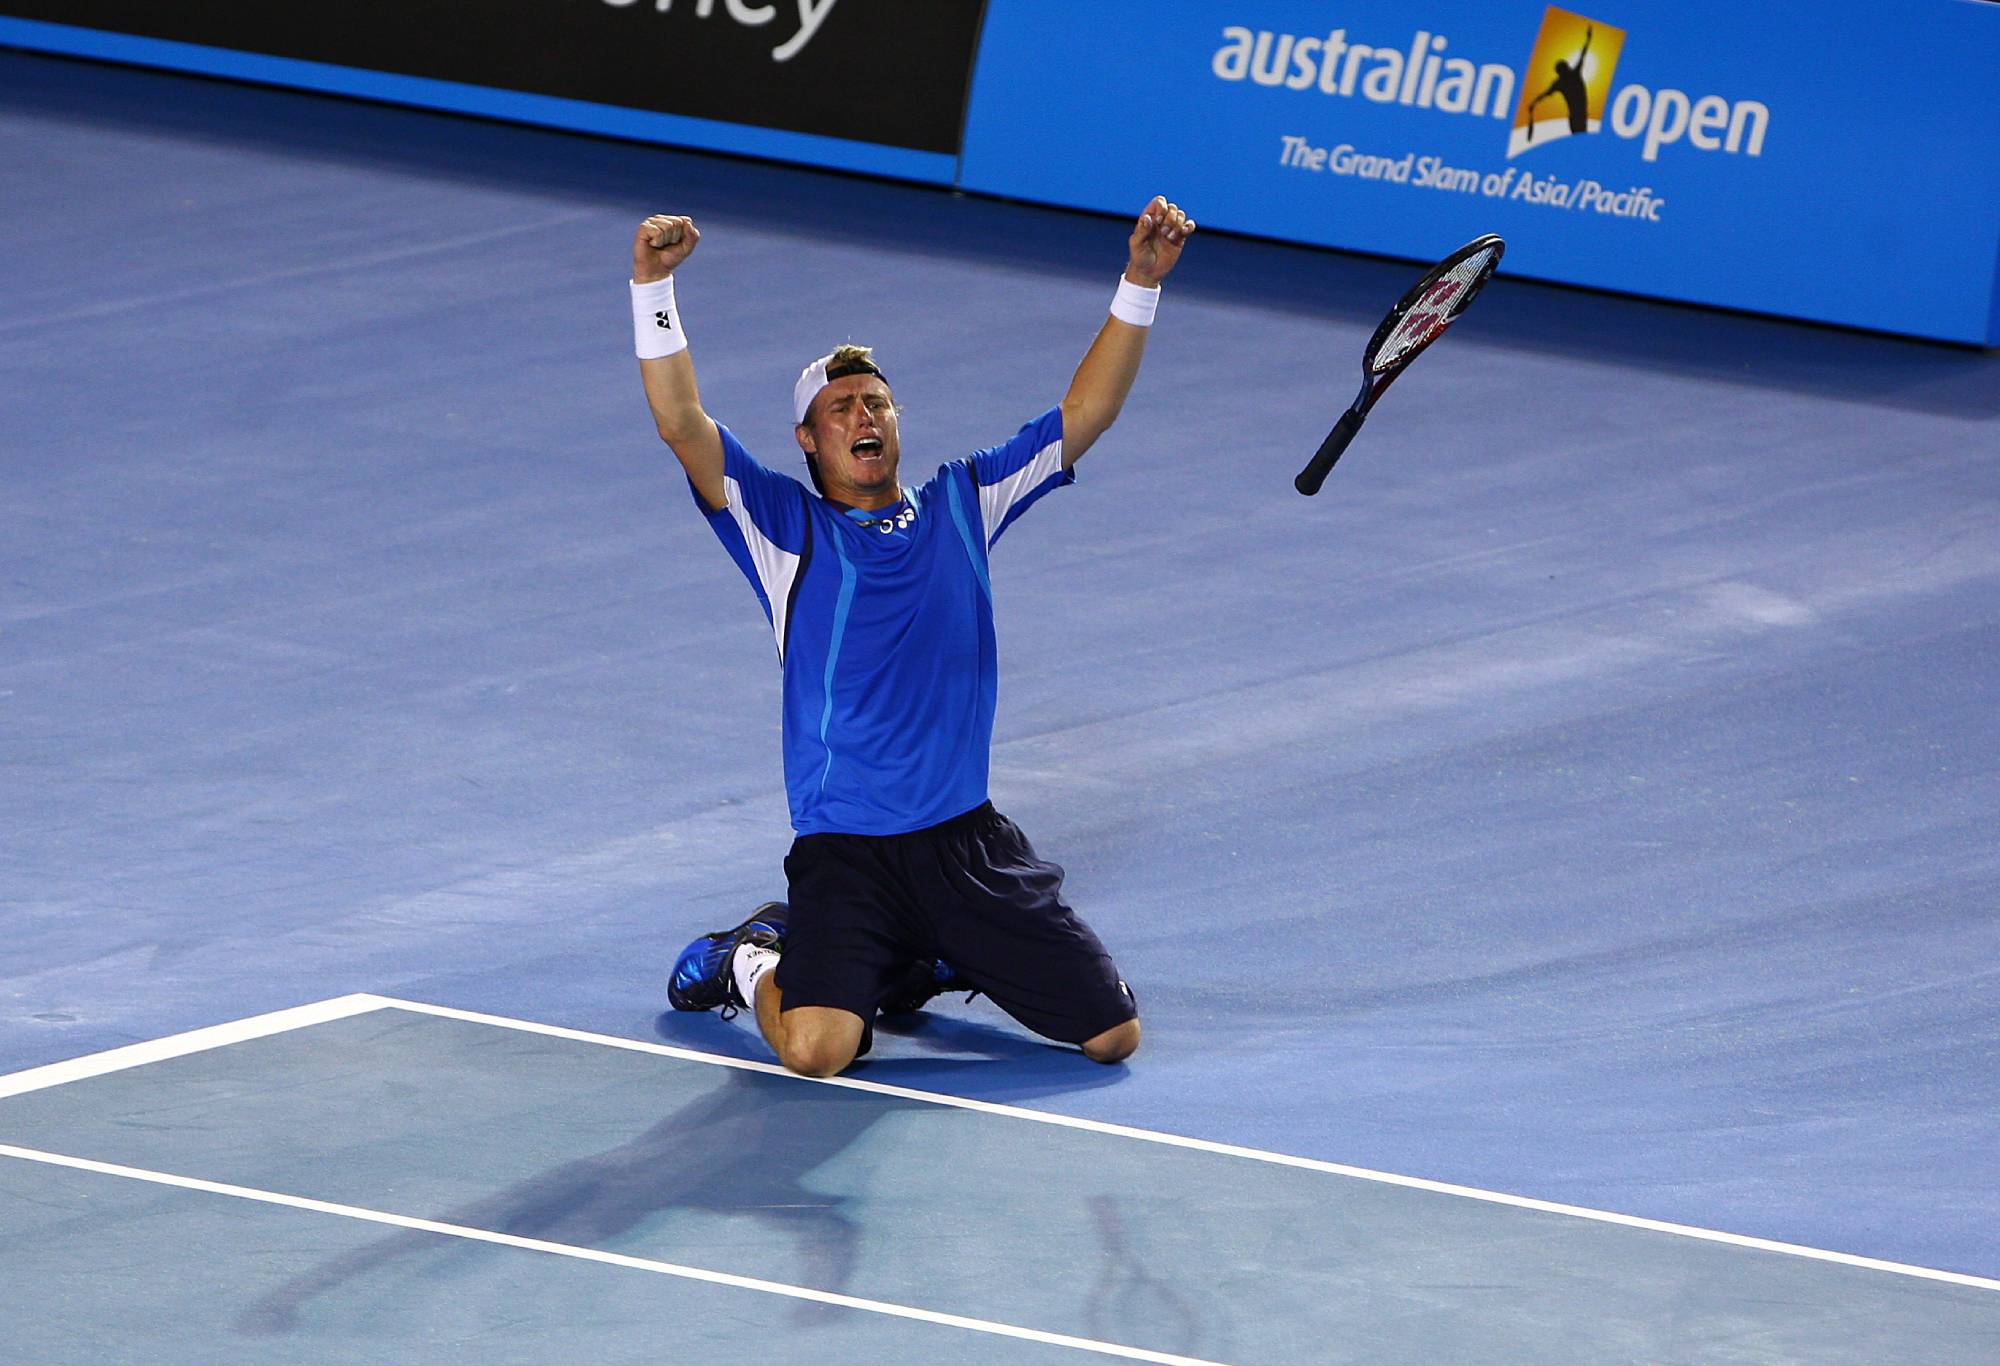 Lleyton Hewitt celebrates defeating Marcos Baghdatis in 5 sets playing past 4:30 am in the morning on day six of the Australian Open (Photo by Jon Buckle - PA Images via Getty Images)